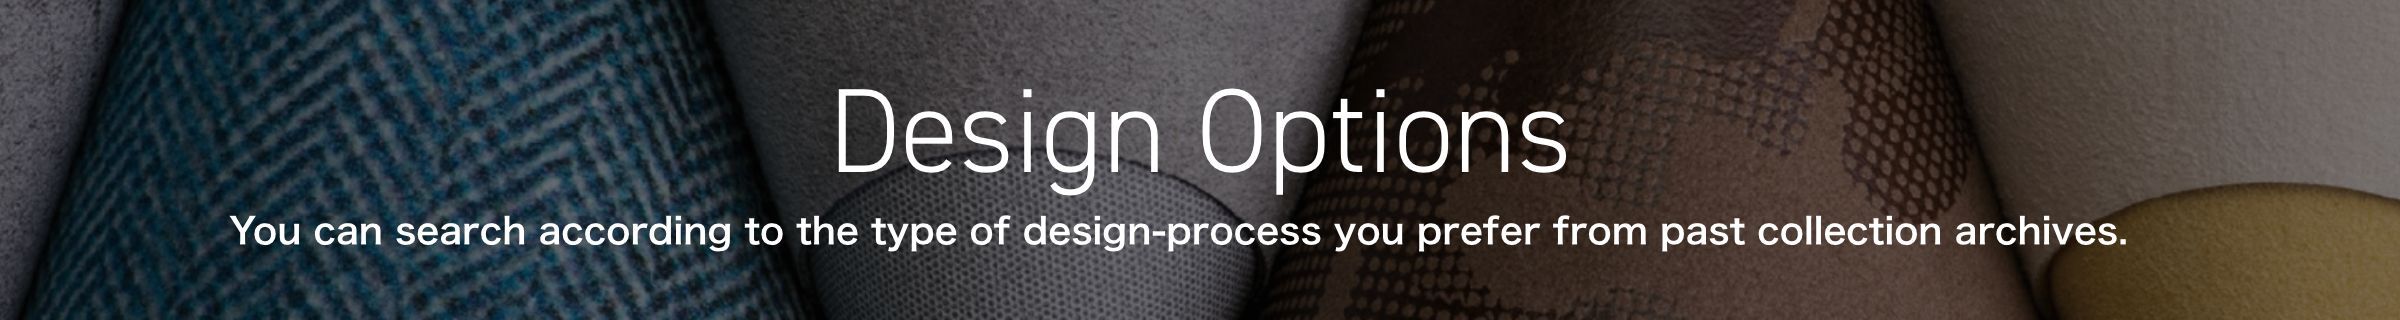 Design Options You can search according to the type of design-process you prefer from past collection archives.